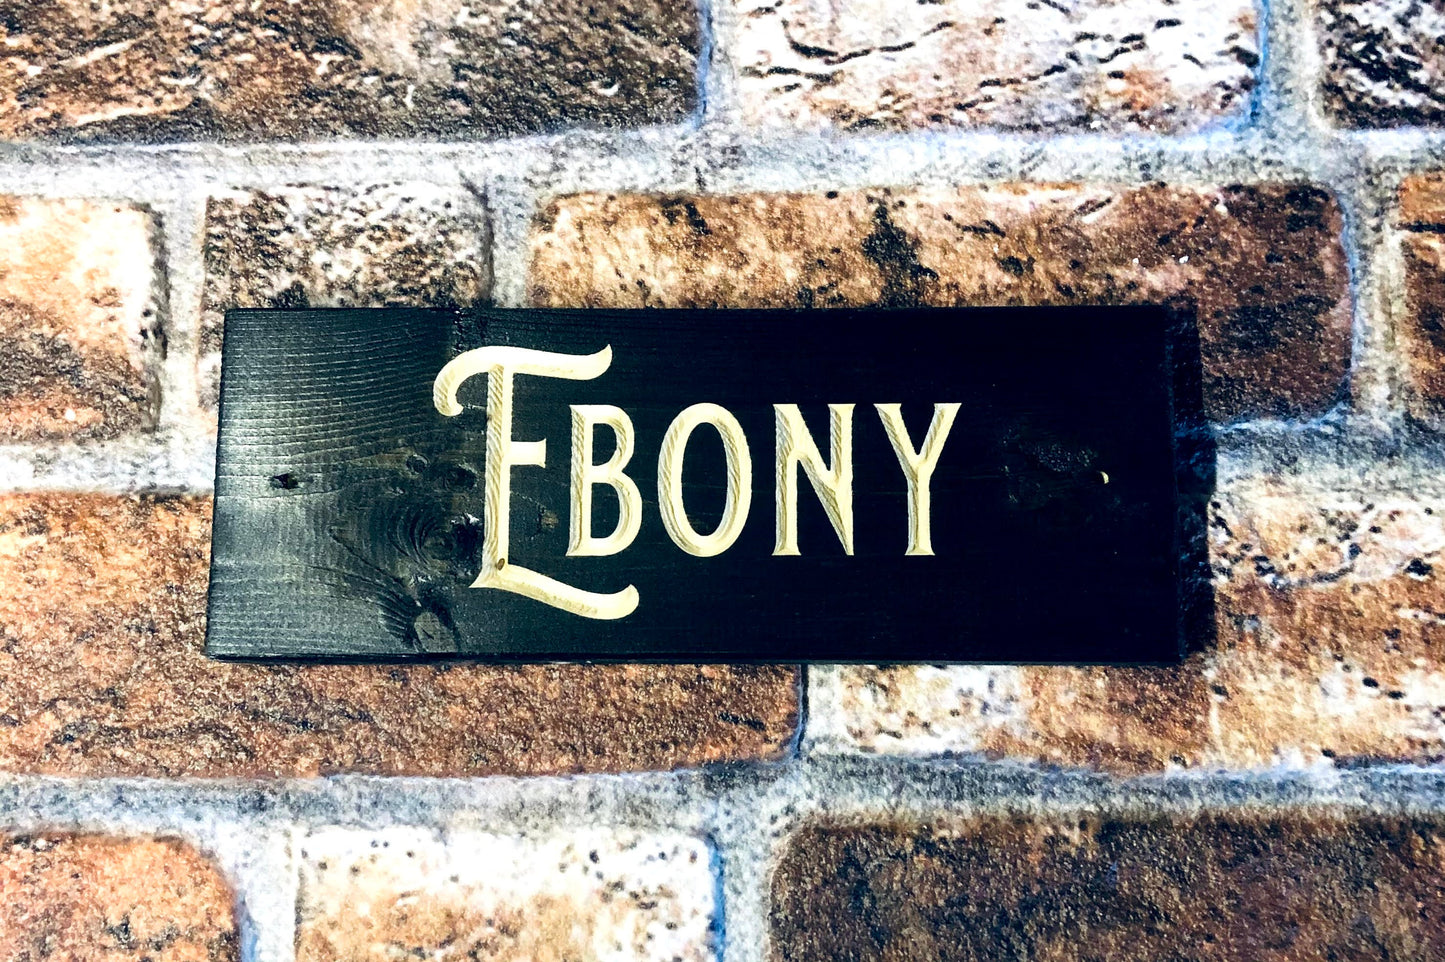 Personalised Horse Stable/Stall Name Sign - Black River Ebony